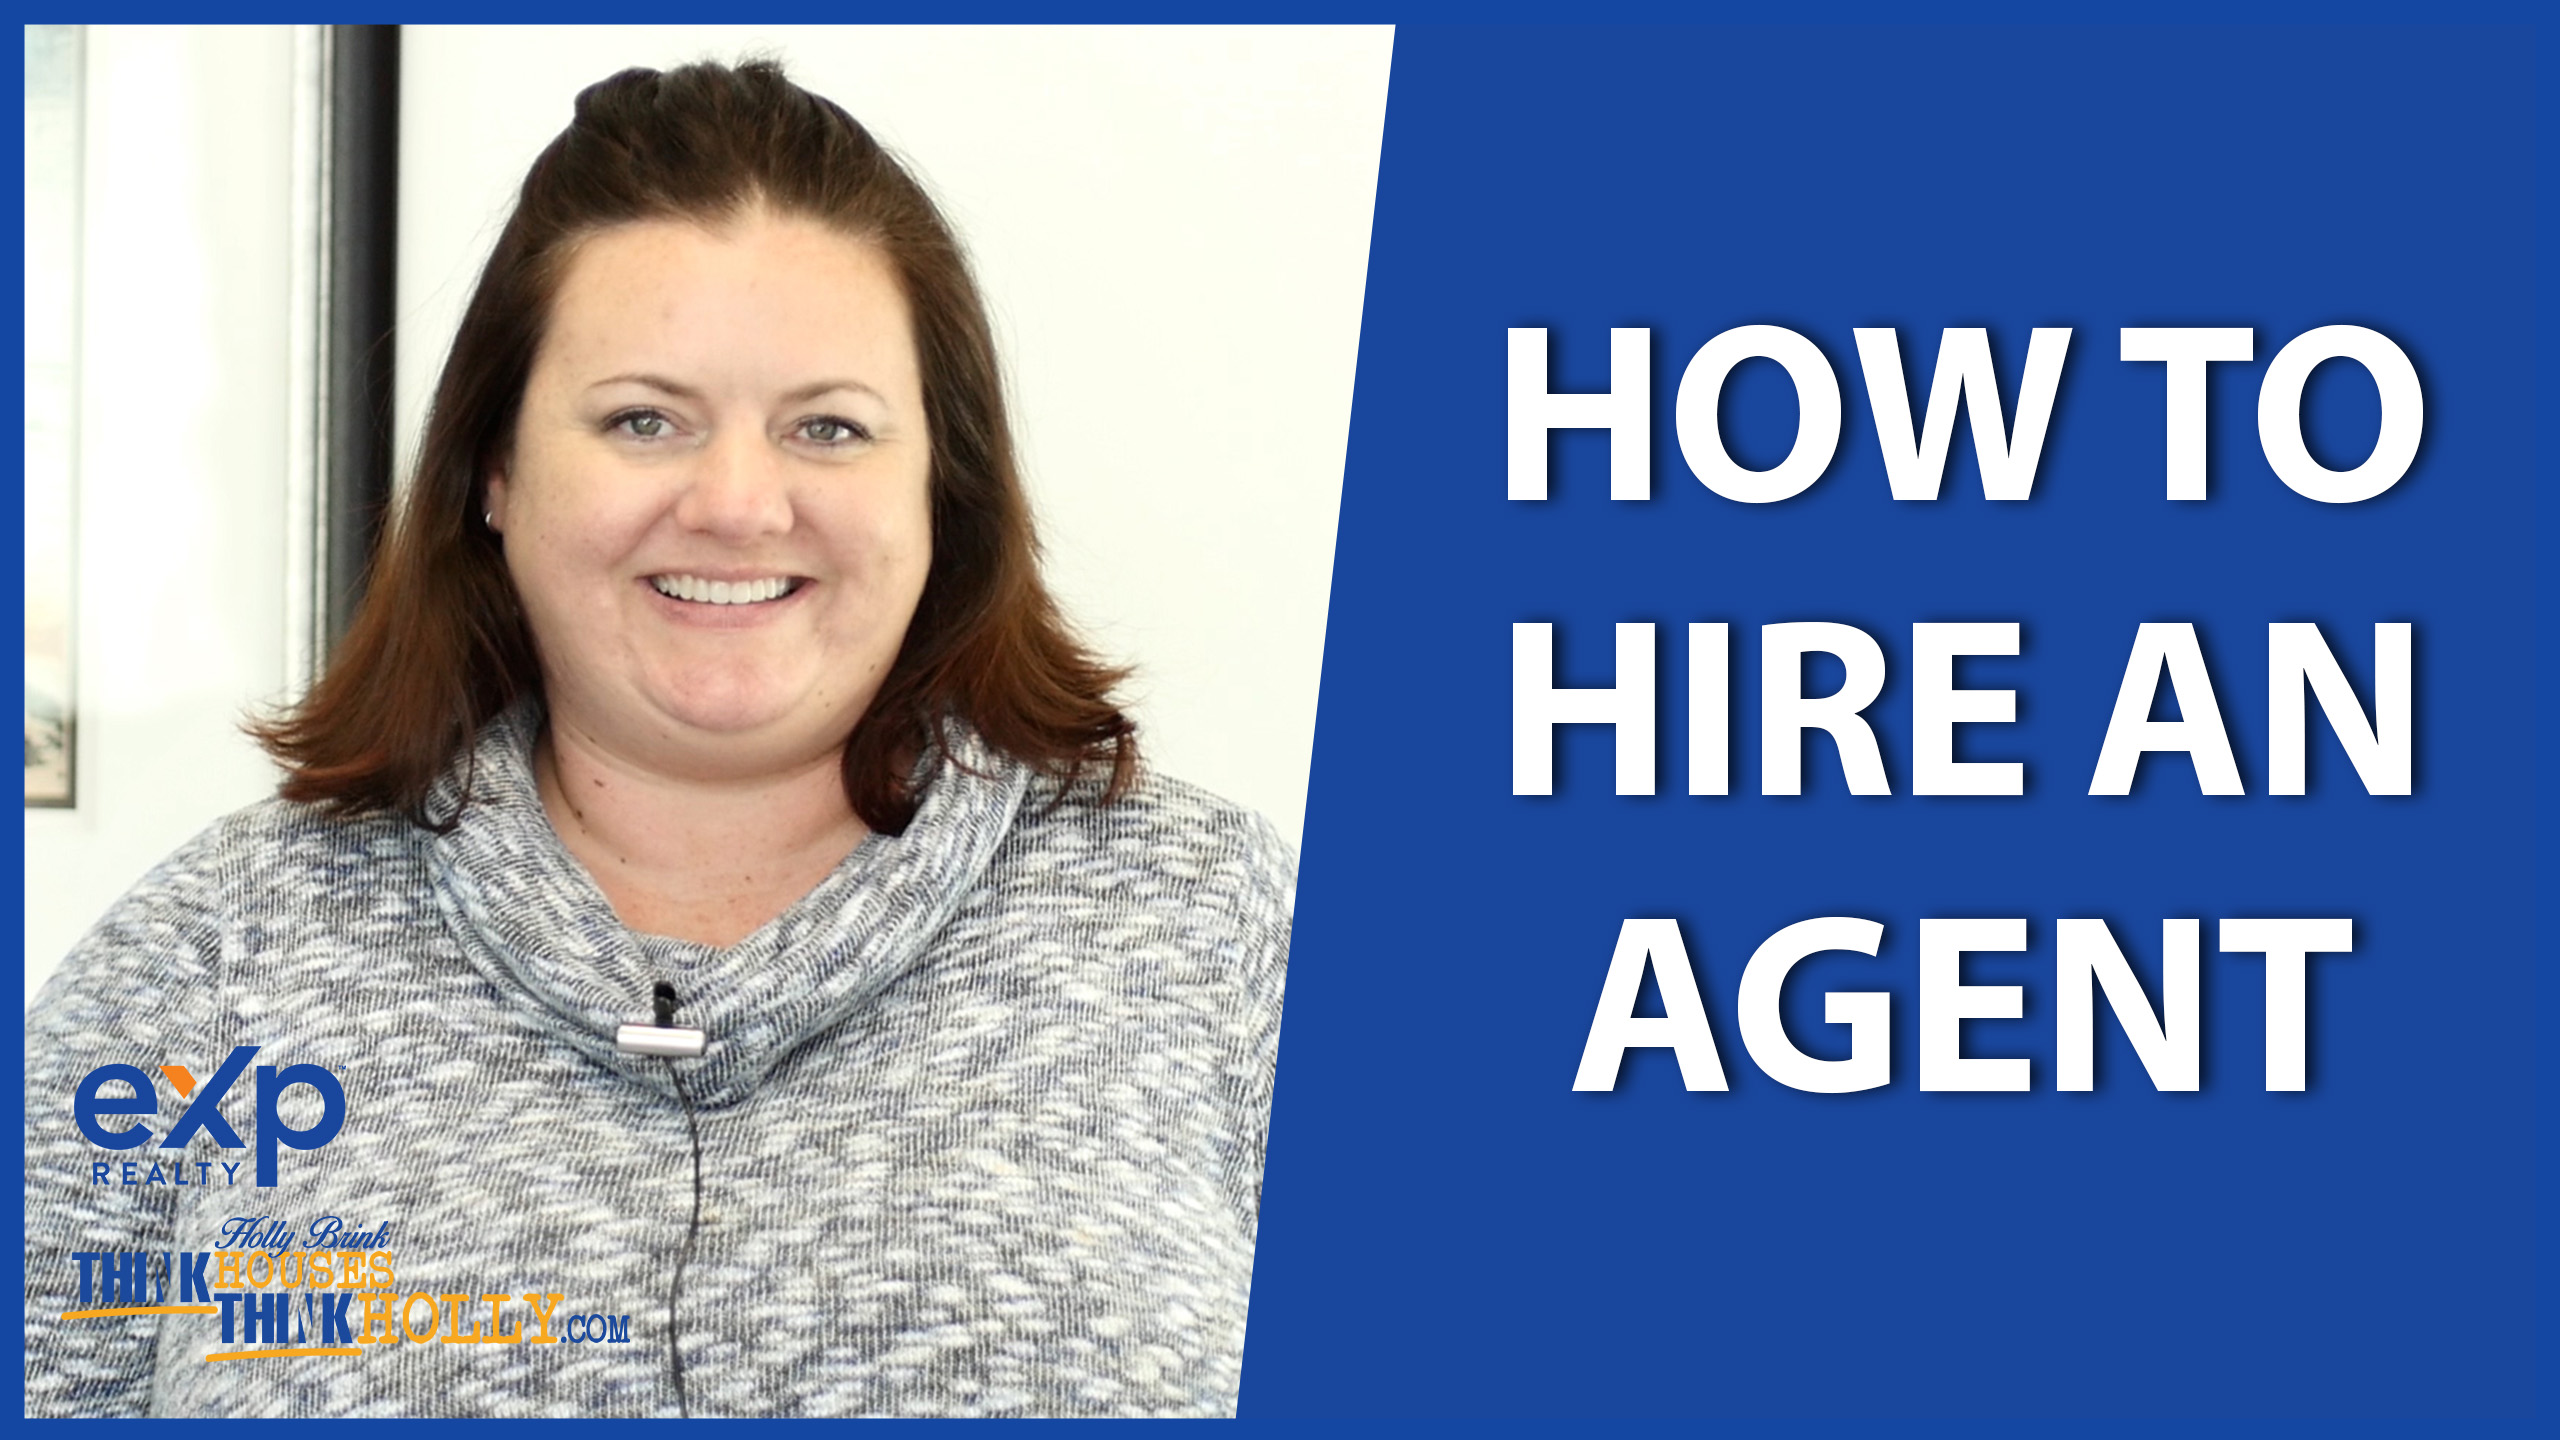 What You Need To Know About Hiring an Agent